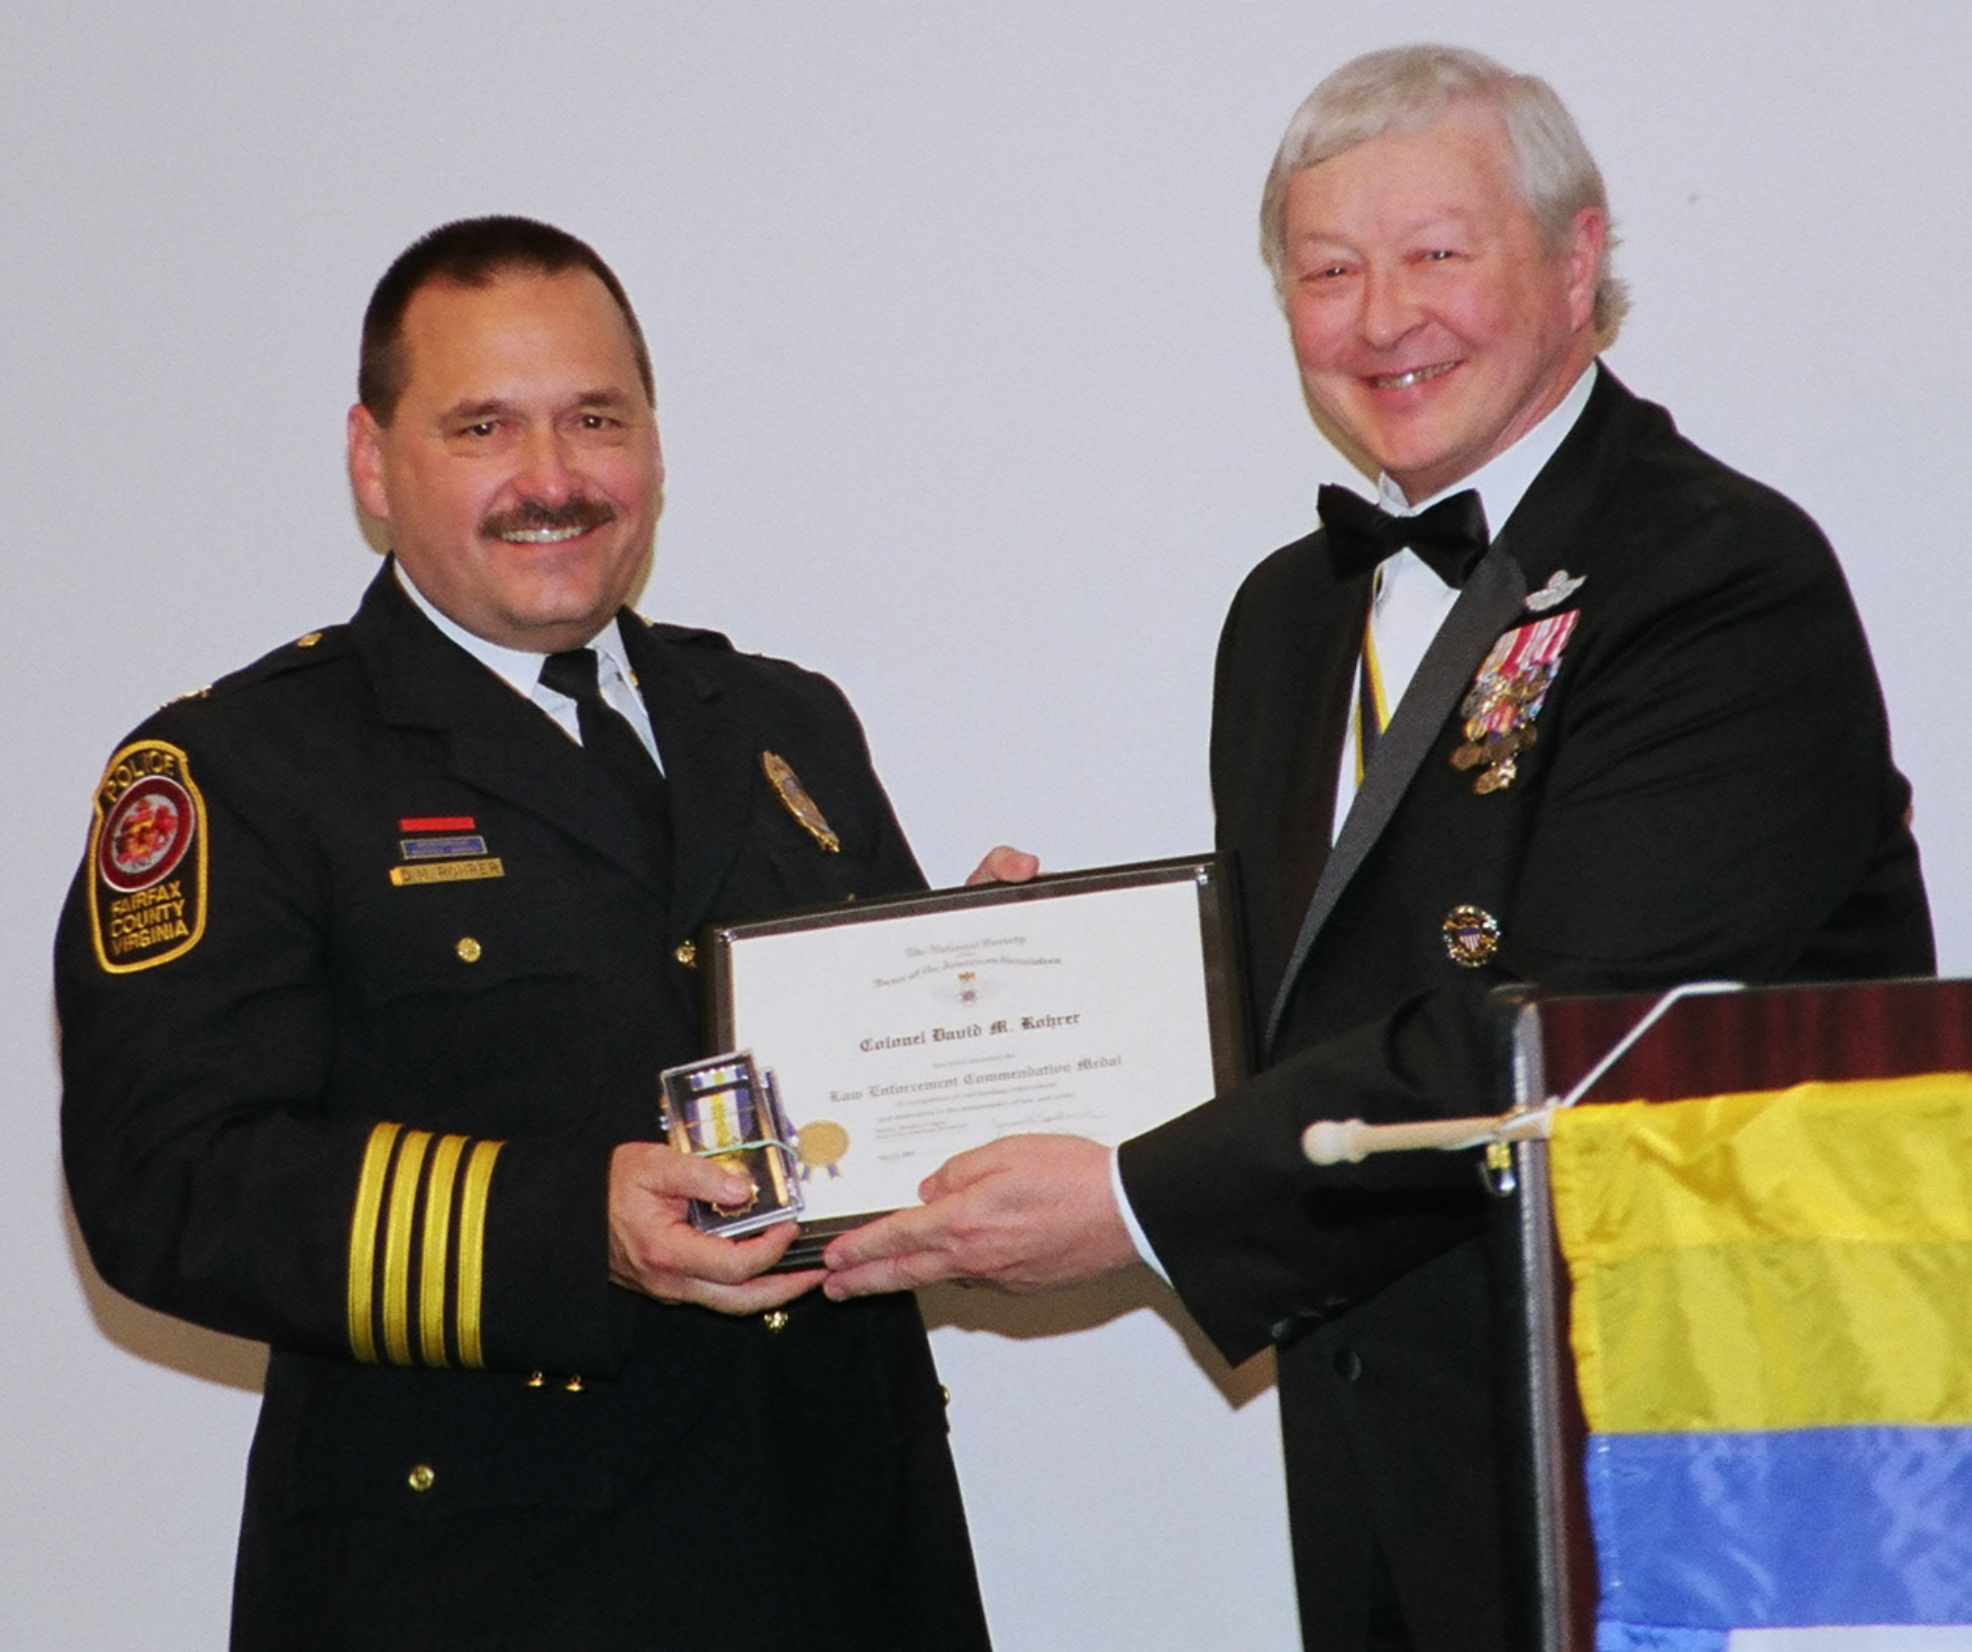 Fairfax County Police Chief Col. David M. Rohrer Receiving his award from President Speelman